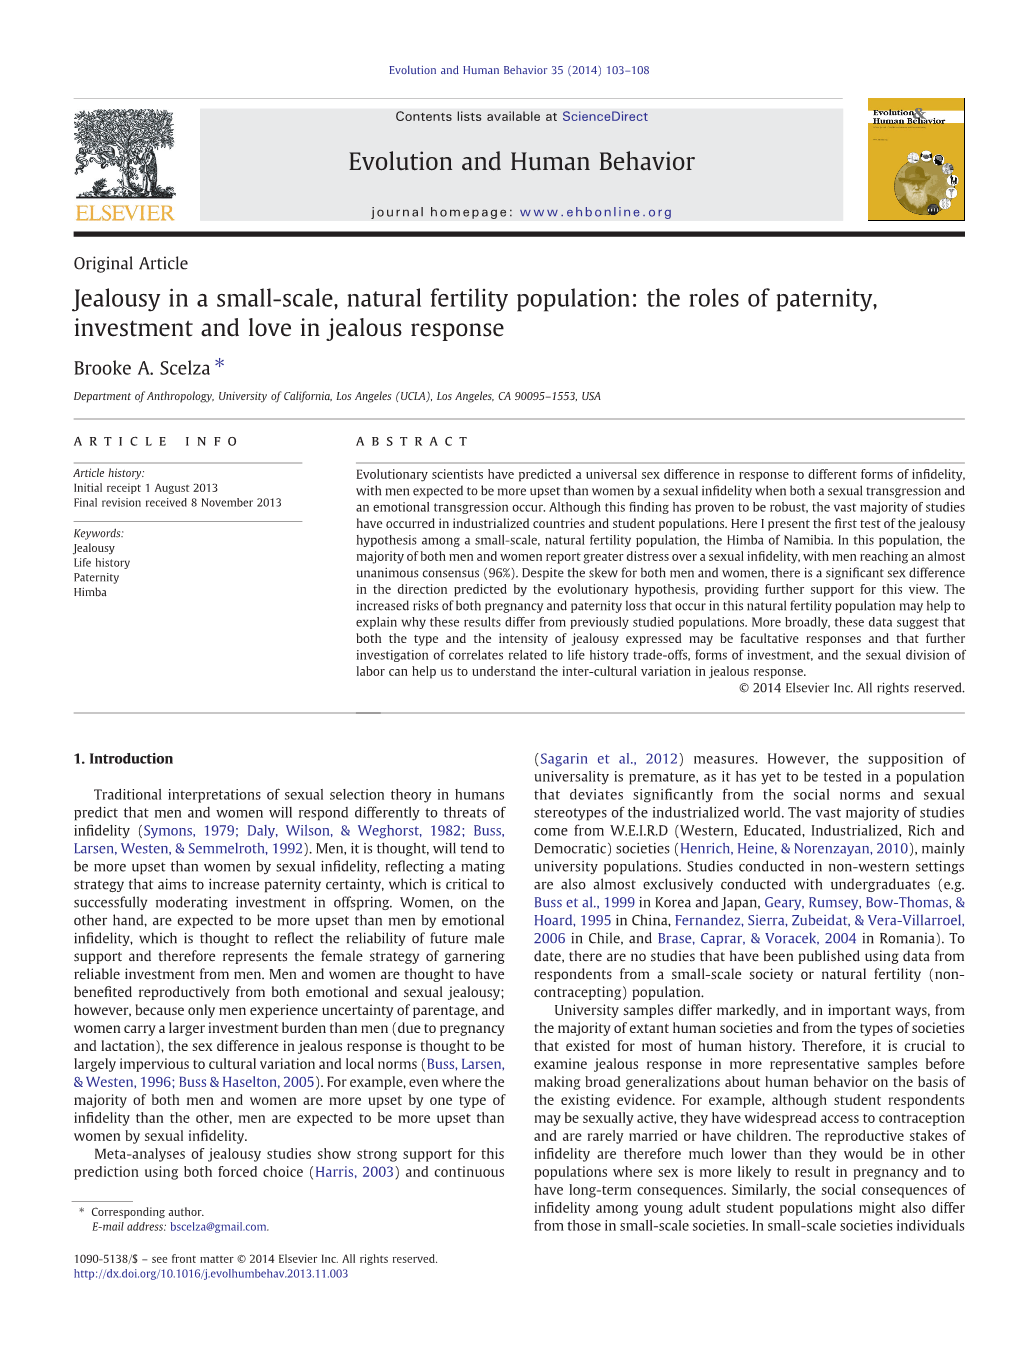 Jealousy in a Small-Scale, Natural Fertility Population: the Roles of Paternity, Investment and Love in Jealous Response